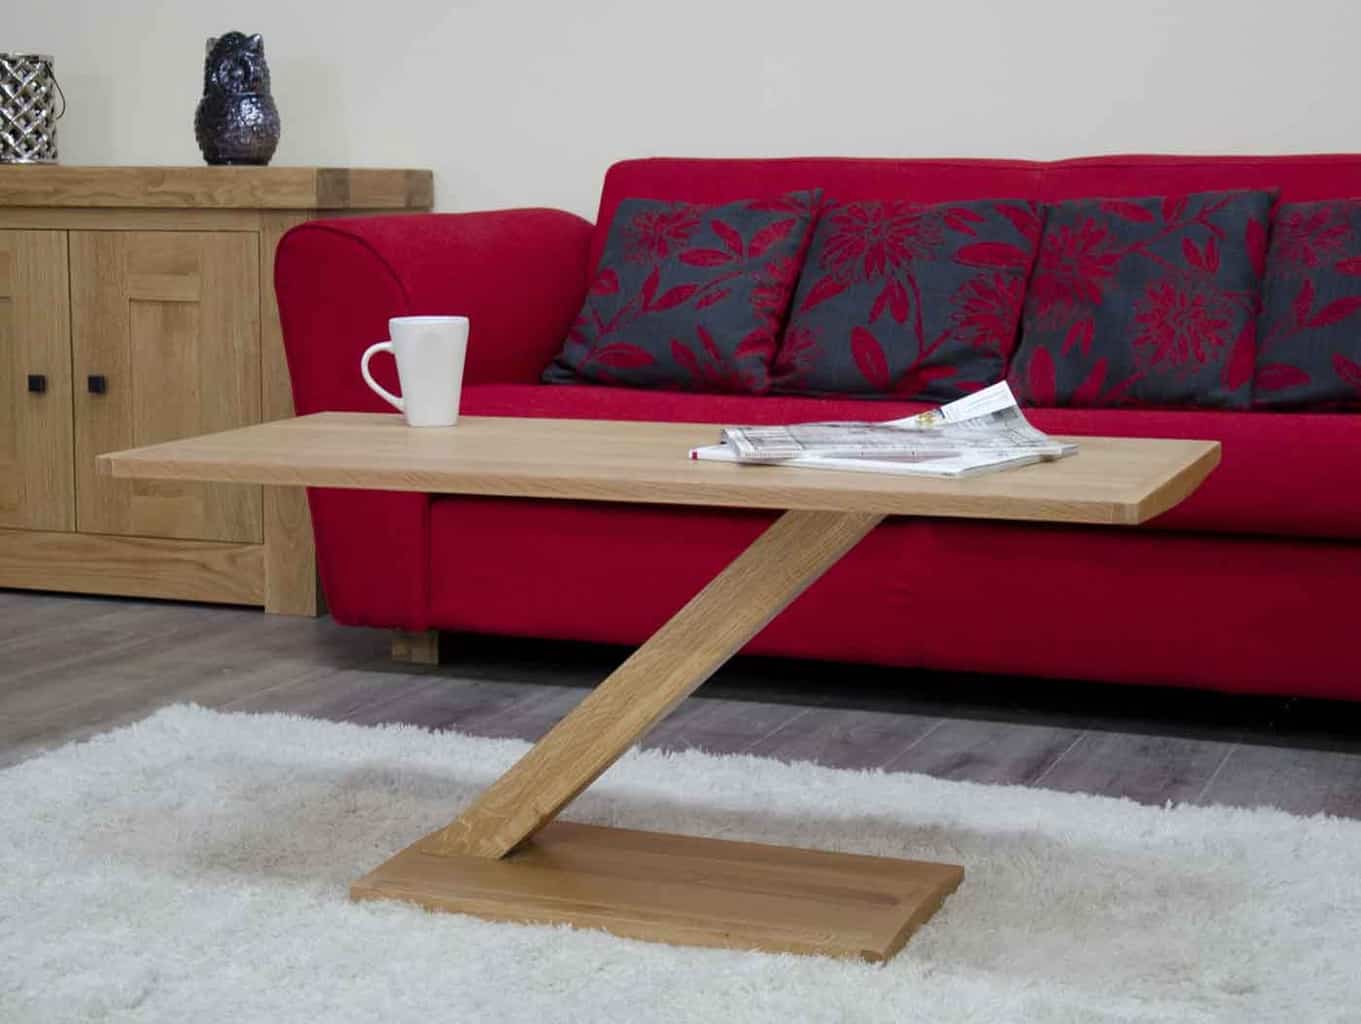 Homestyle Z Solid Oak Modern Coffee Table | Reduced To Clear – Was £225 – Now £119